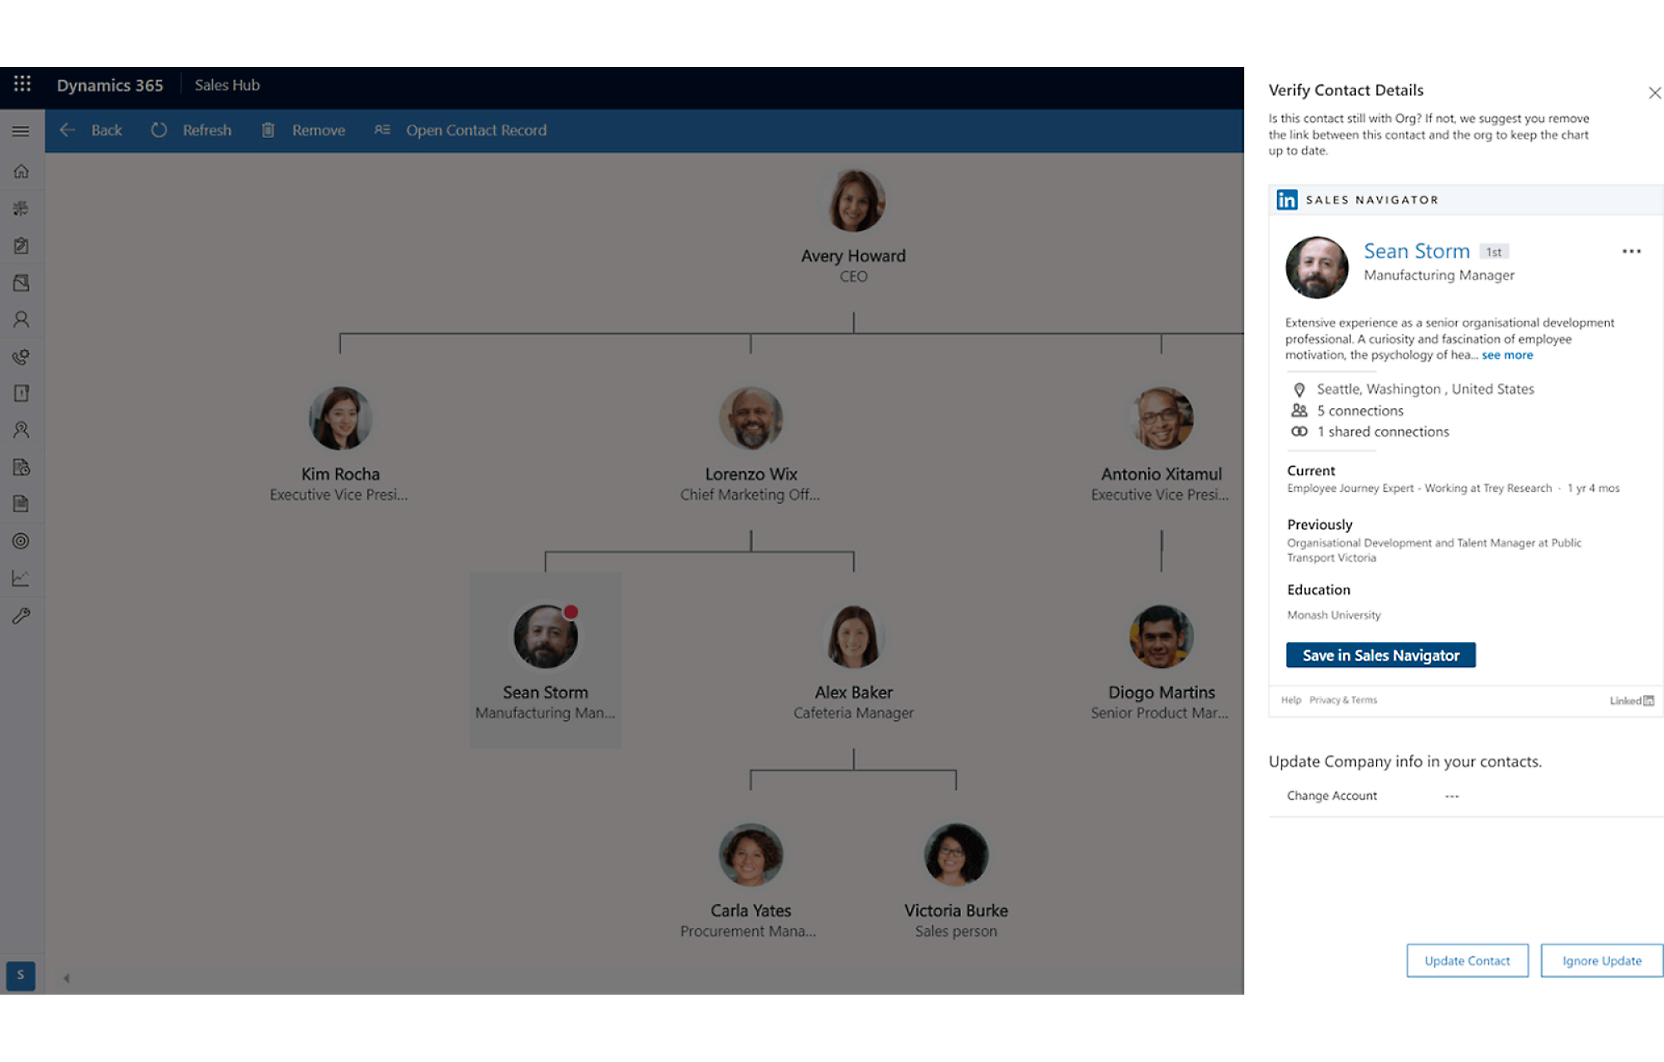 A screenshot of a Dynamics 365 interface showing an organizational chart and a detailed profile of an employee named Sean Storm